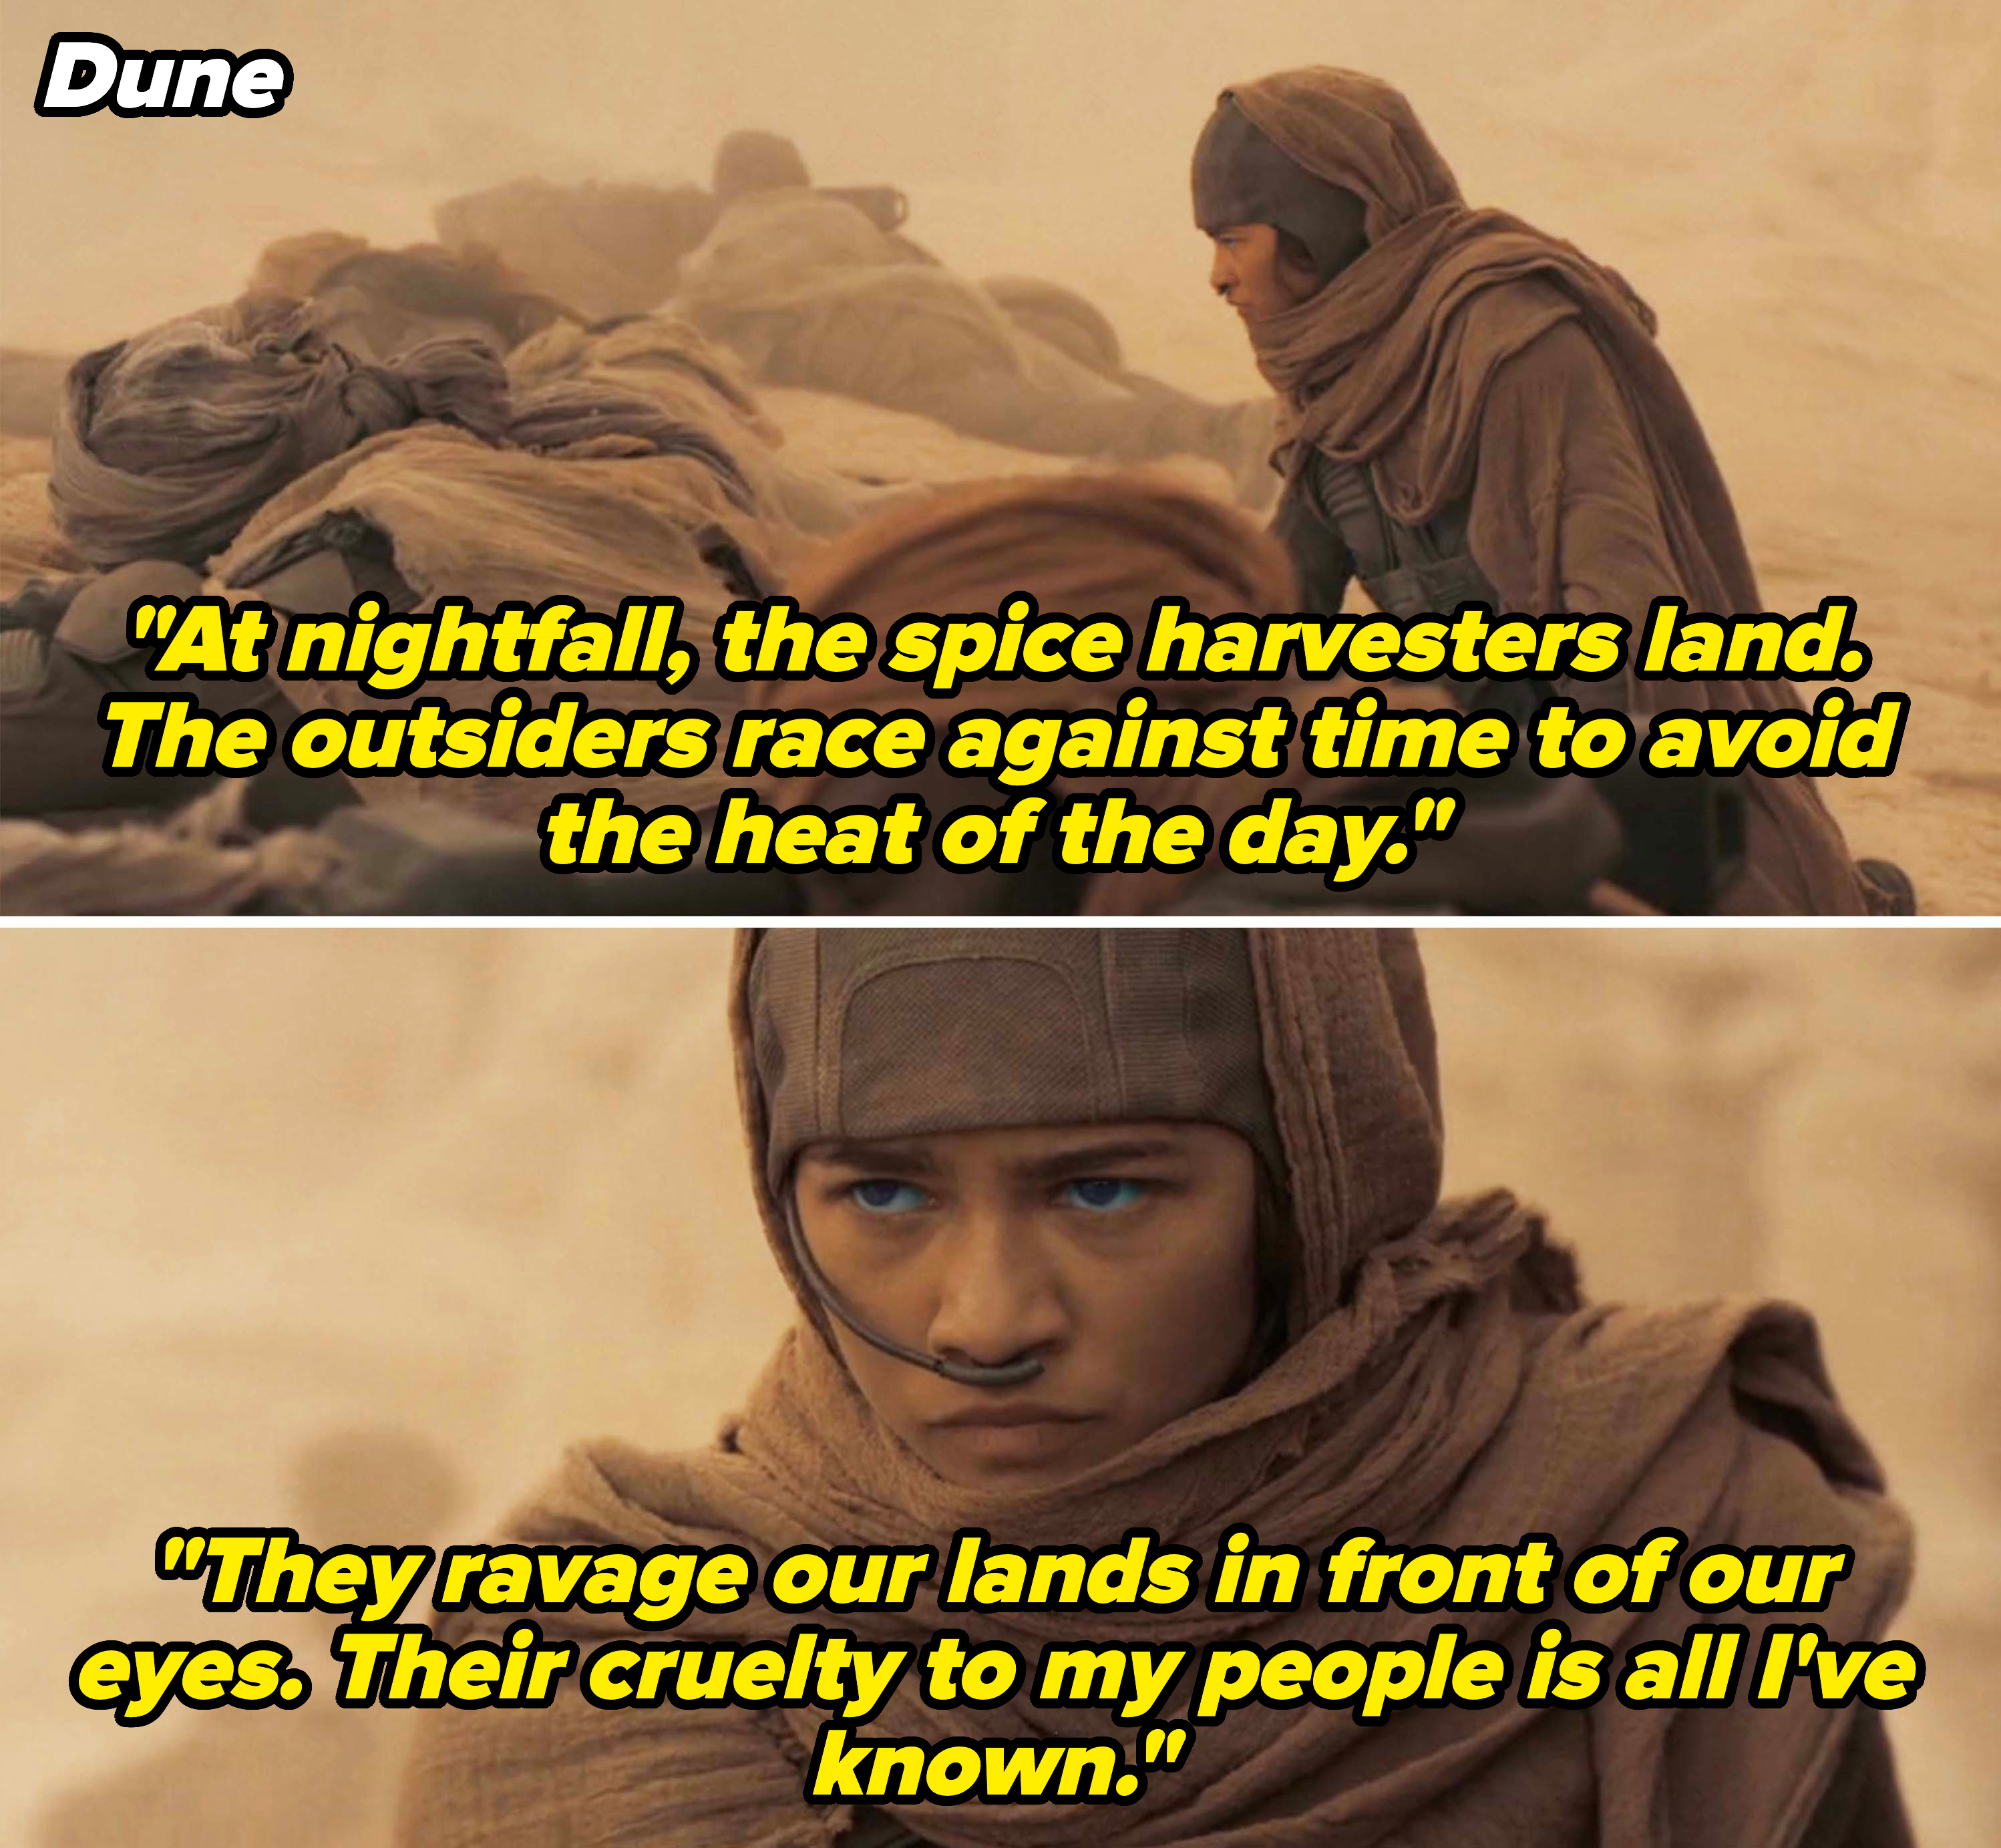 Chani in Dune explaining how outsiders come to mine spice and how they are cruel to her people